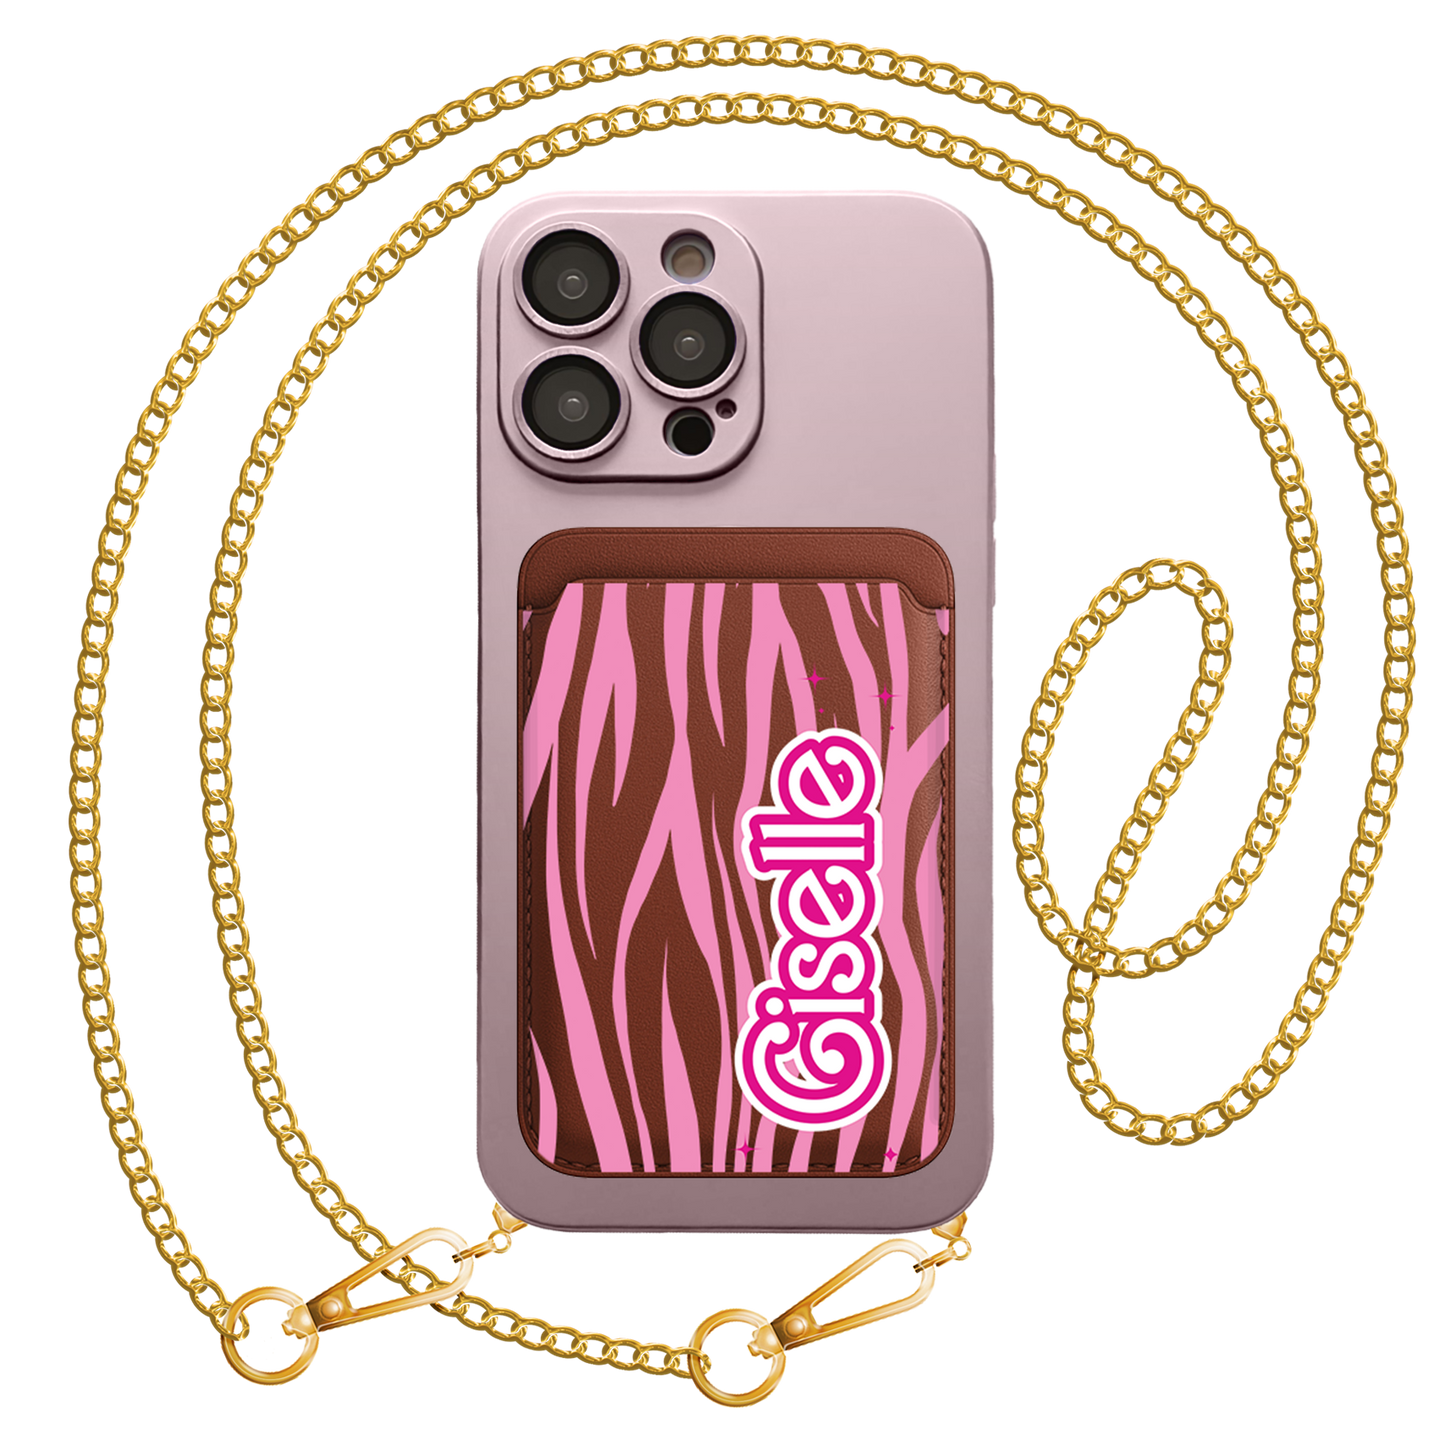 iPhone Magnetic Wallet Silicone Case - Barbie Zebra Pattern